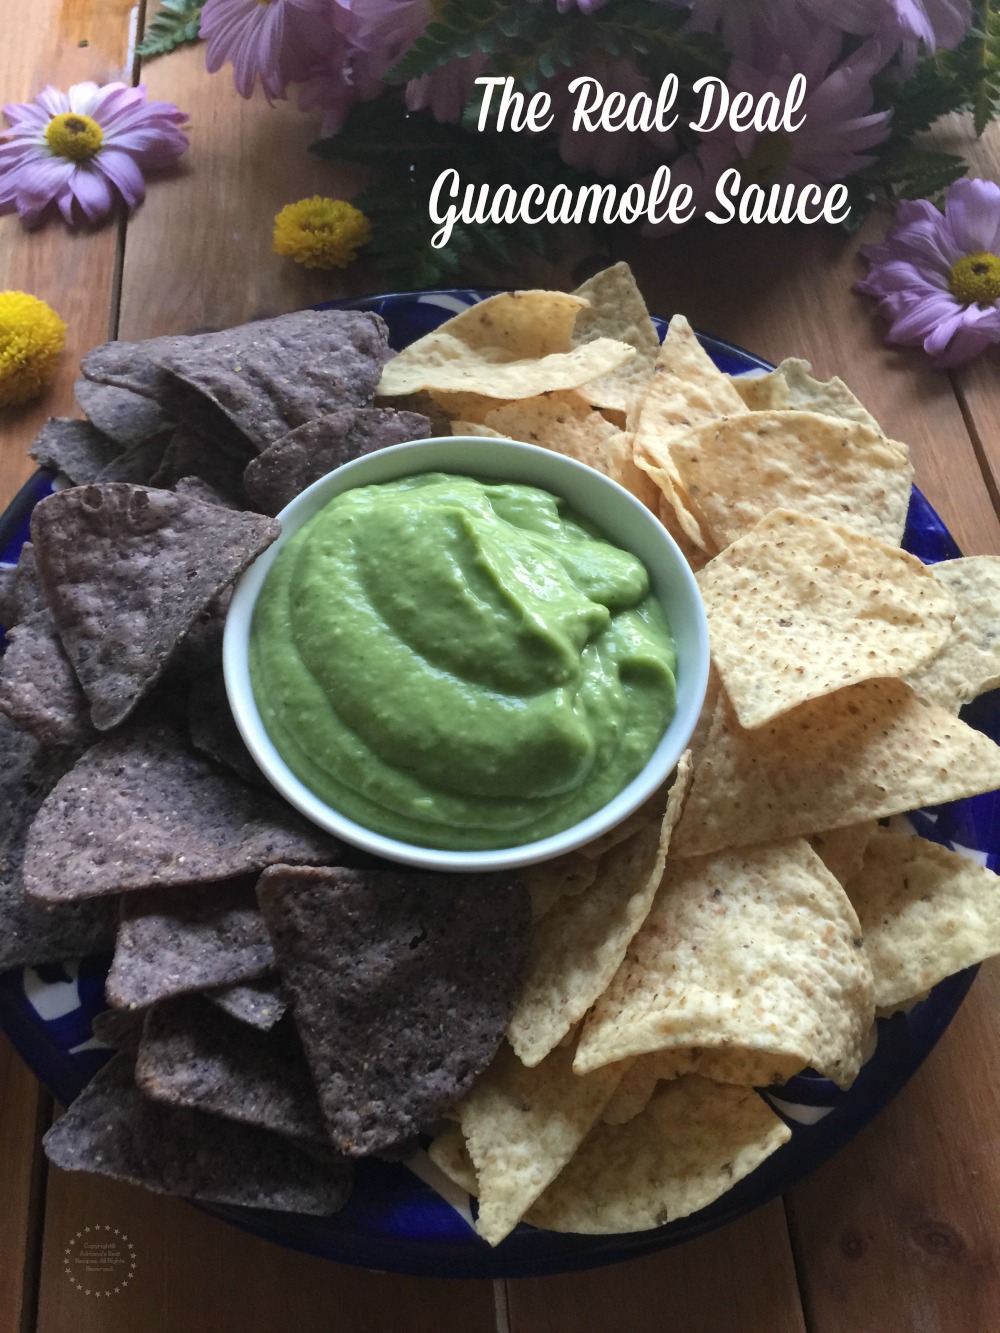 This is the real deal guacamole sauce. Made with Mexican hass avocados, tomatillos, serrano chiles, cilantro and garlic